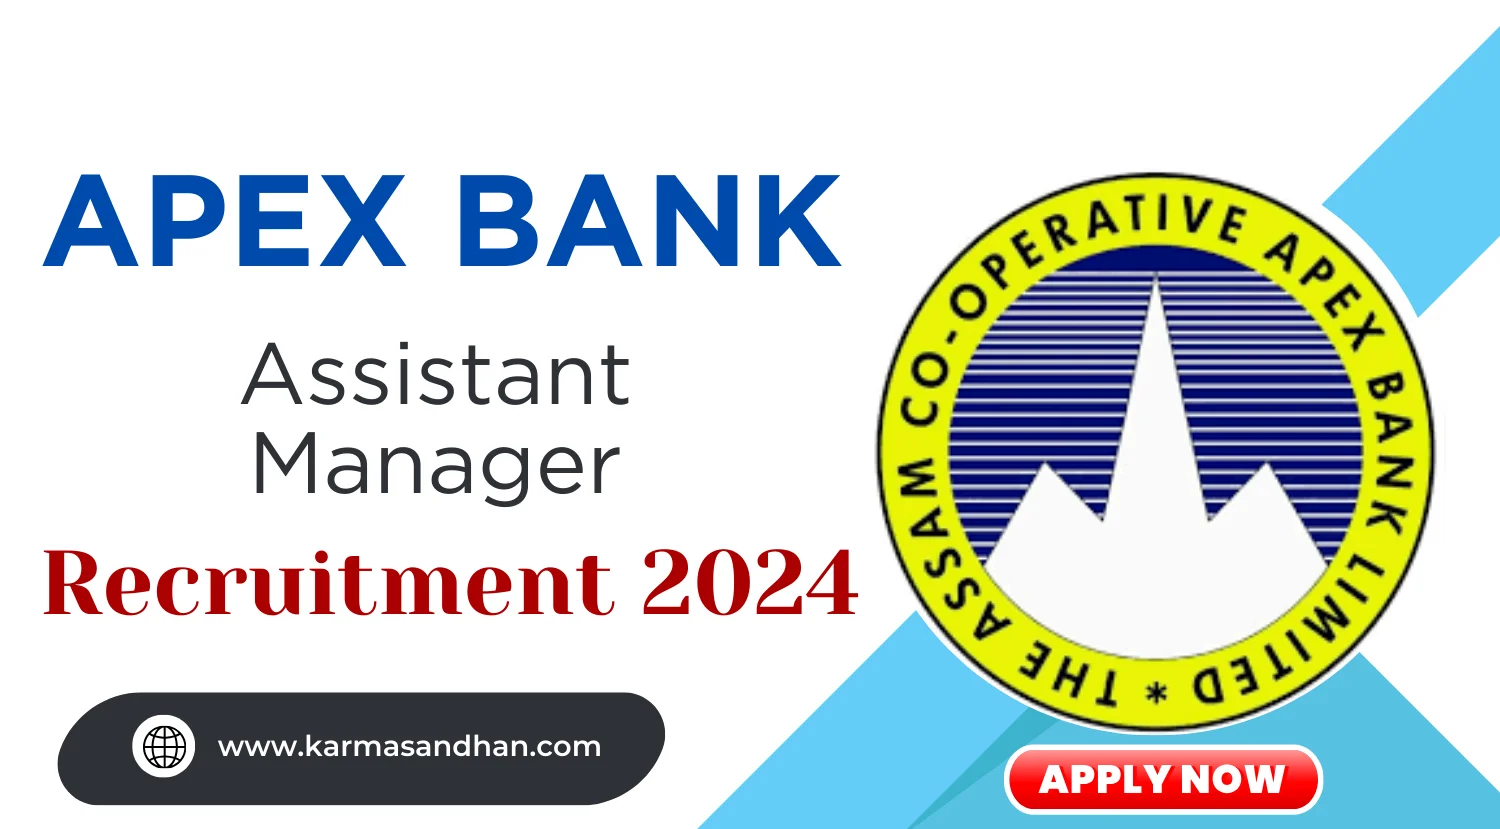 Apex Bank Assistant Manager Recruitment 2024